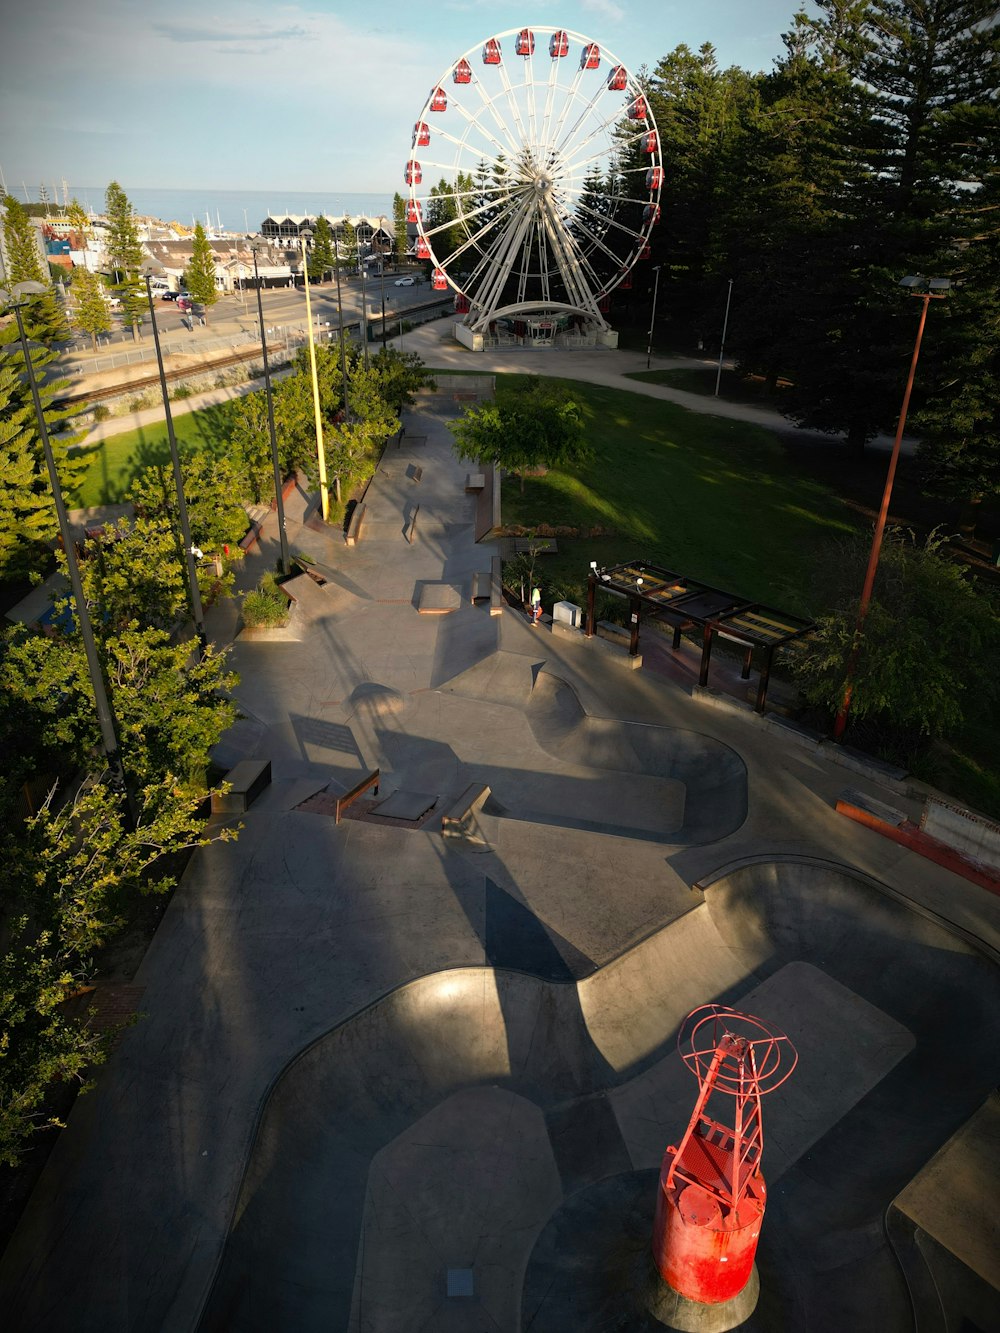 a skateboard park with a ferris wheel in the background